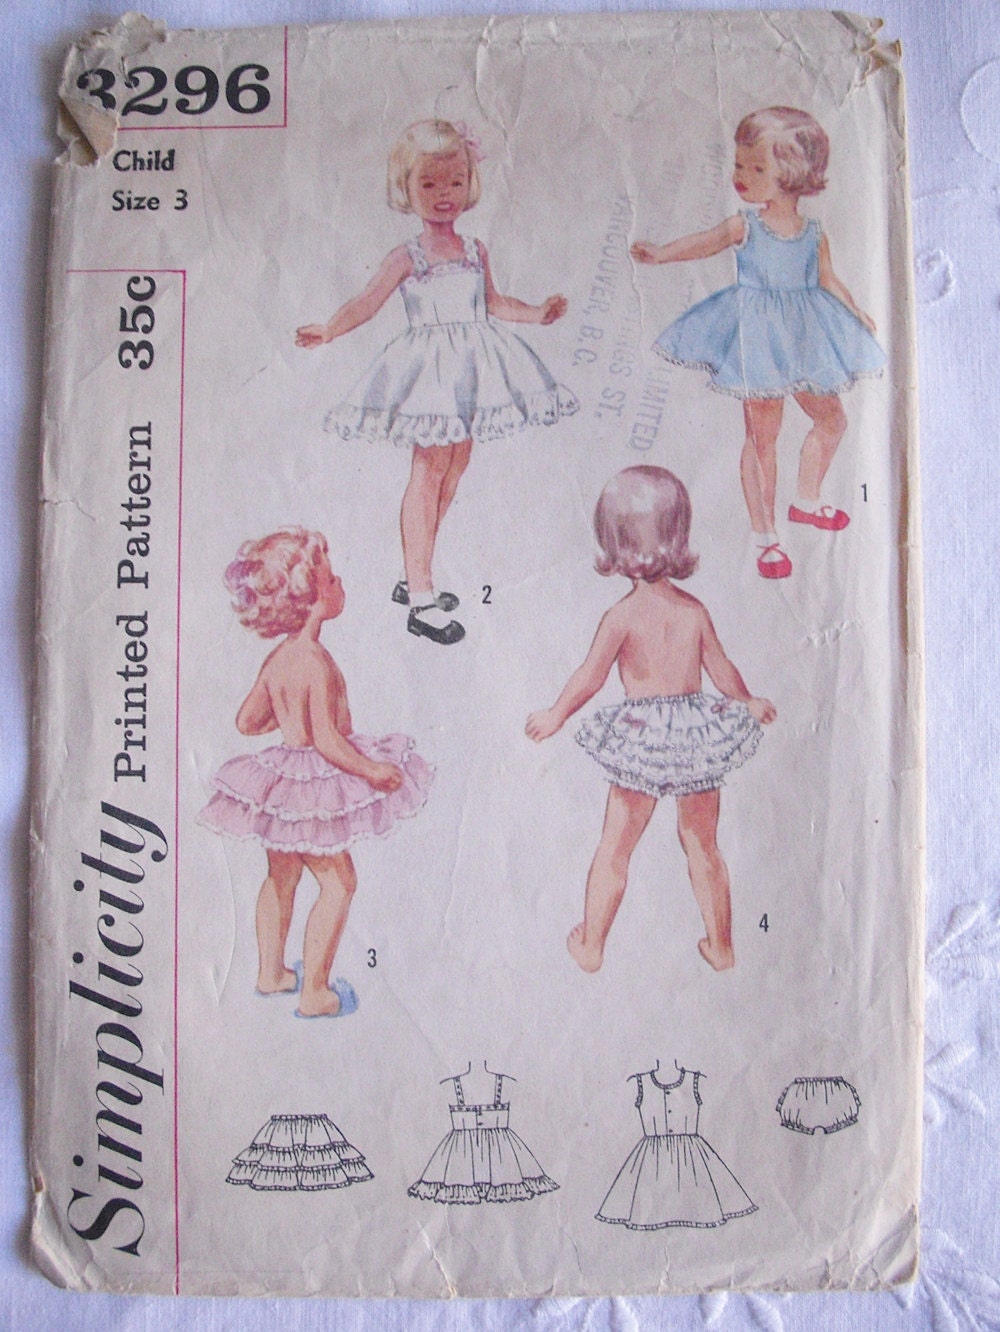 Simplicity Sewing Pattern...Girl's Slip Petticoat and Panties...from the 1950s...Age 3